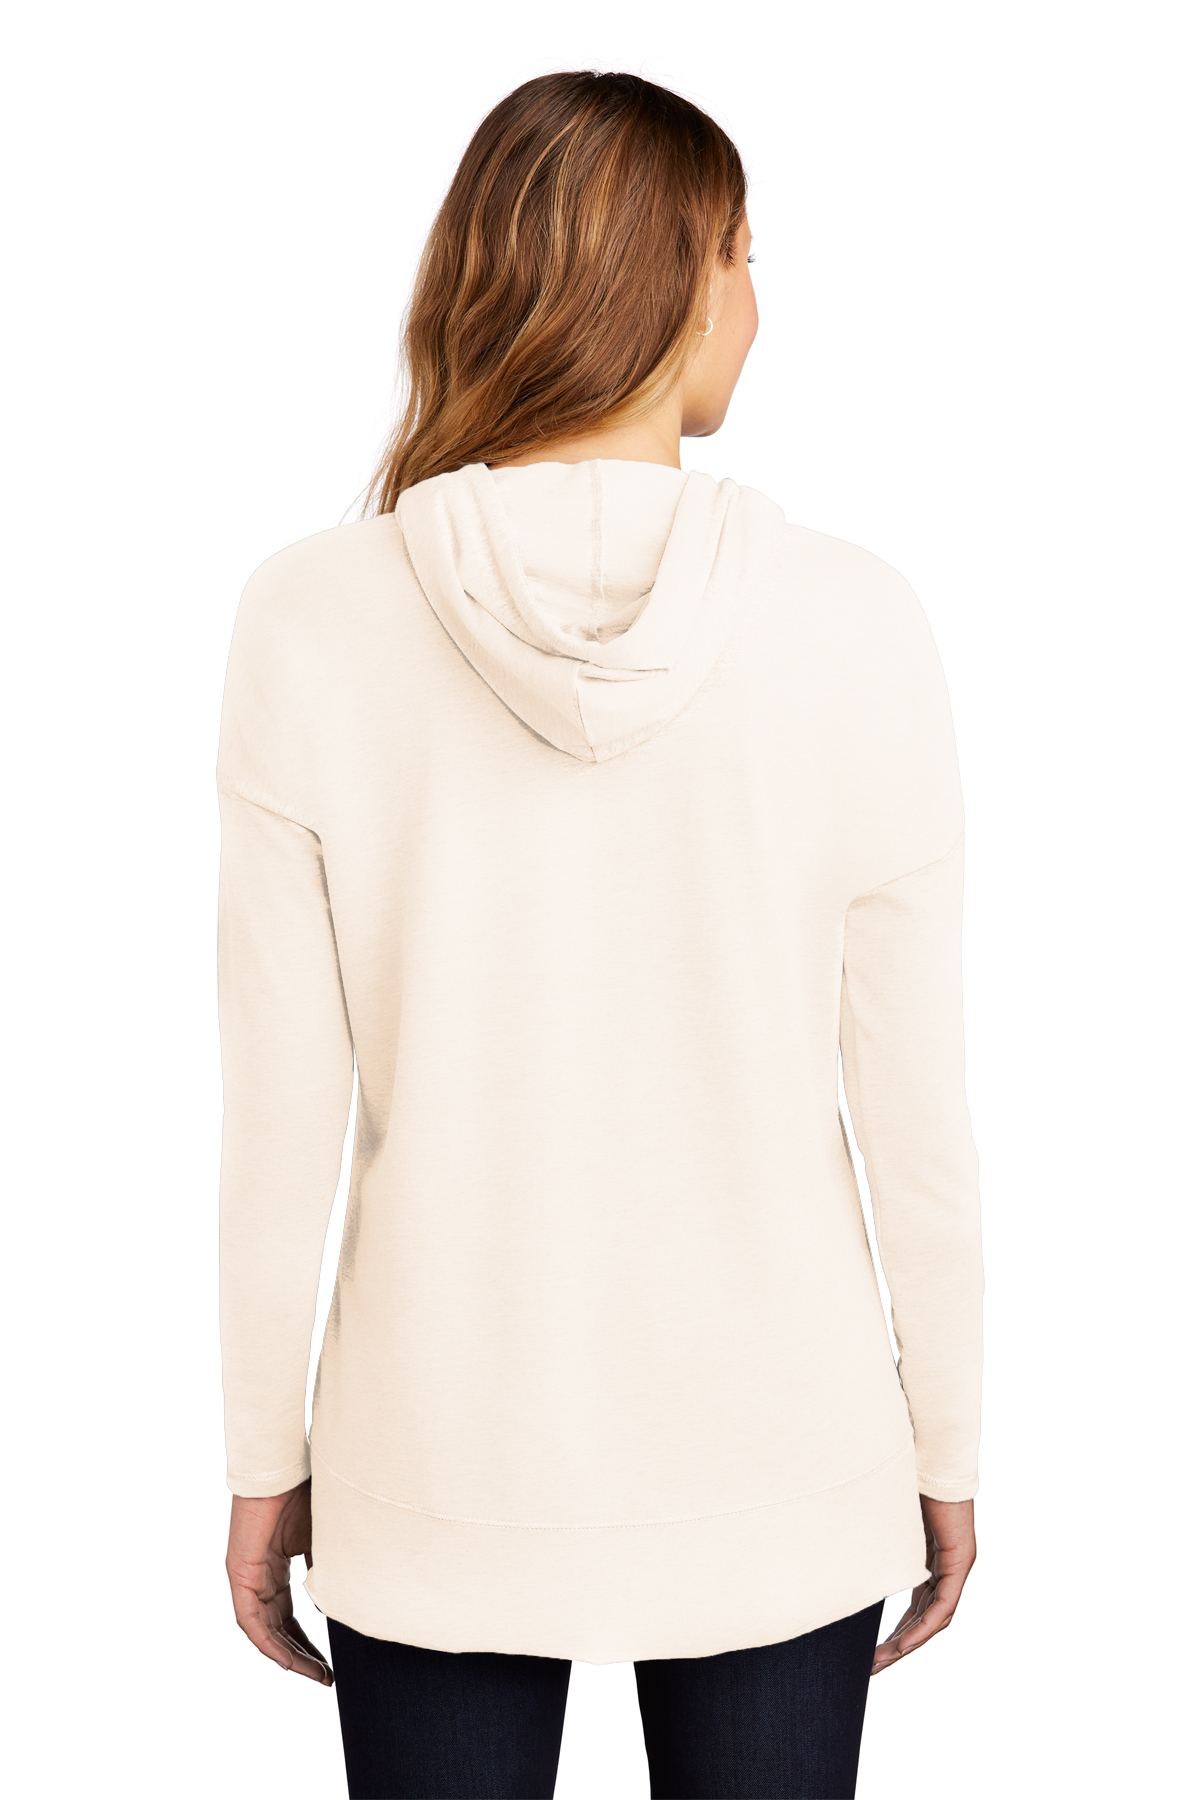 District Women’s Featherweight French Terry Hoodie | Product | SanMar